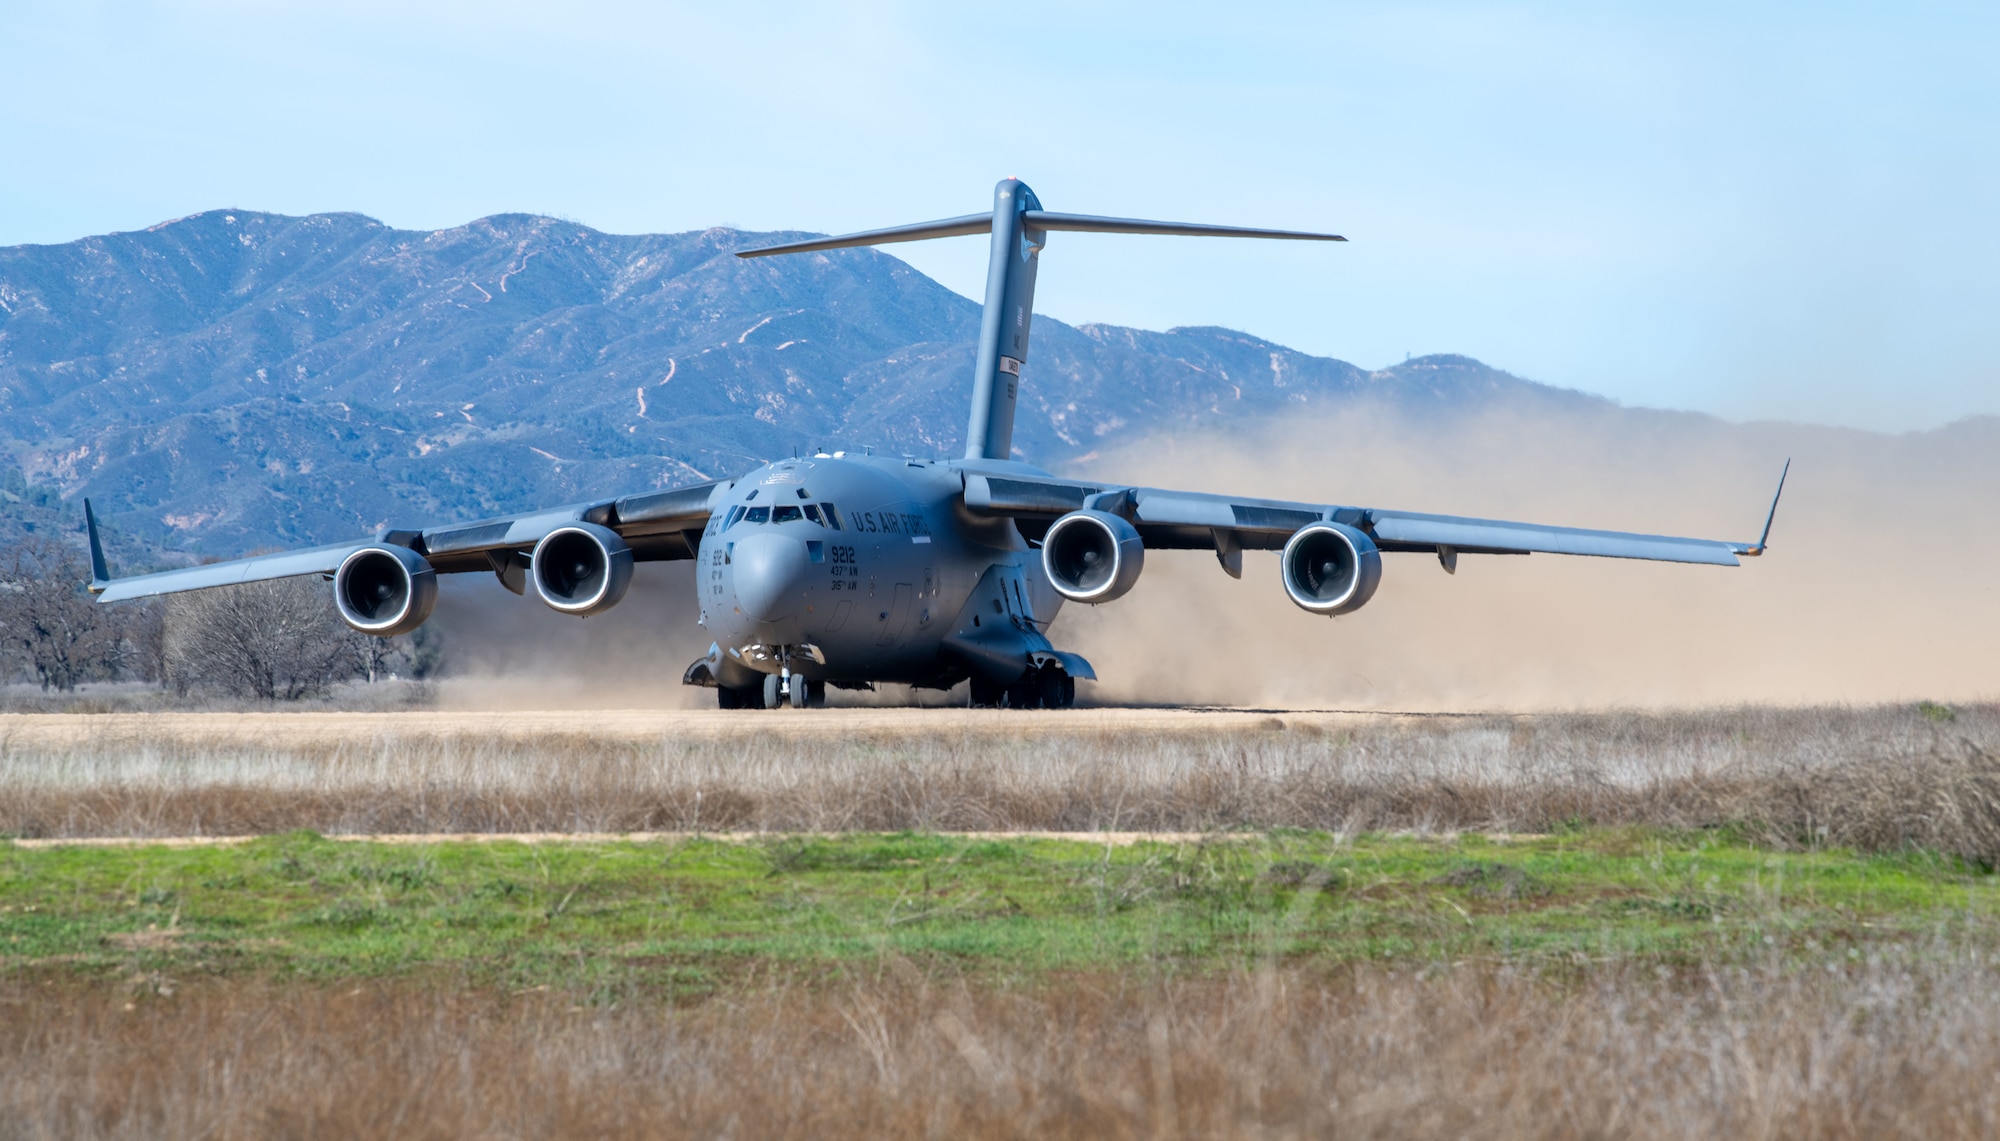 A C-17 Globemaster III aircraft assigned to Joint Base Charleston, South Carolina, takes off from a semi-prepared runway during exercise Bamboo Eagle 24-1, Jan. 29, 2024. Through the use of designated air space, BE provides Airmen, allies and partners a flexible, combat-representative, multidimensional battlespace to conduct testing tactics development, and advanced training in support of U.S. national interests. (U.S. Air Force photo by Senior Airman Christian Silvera)